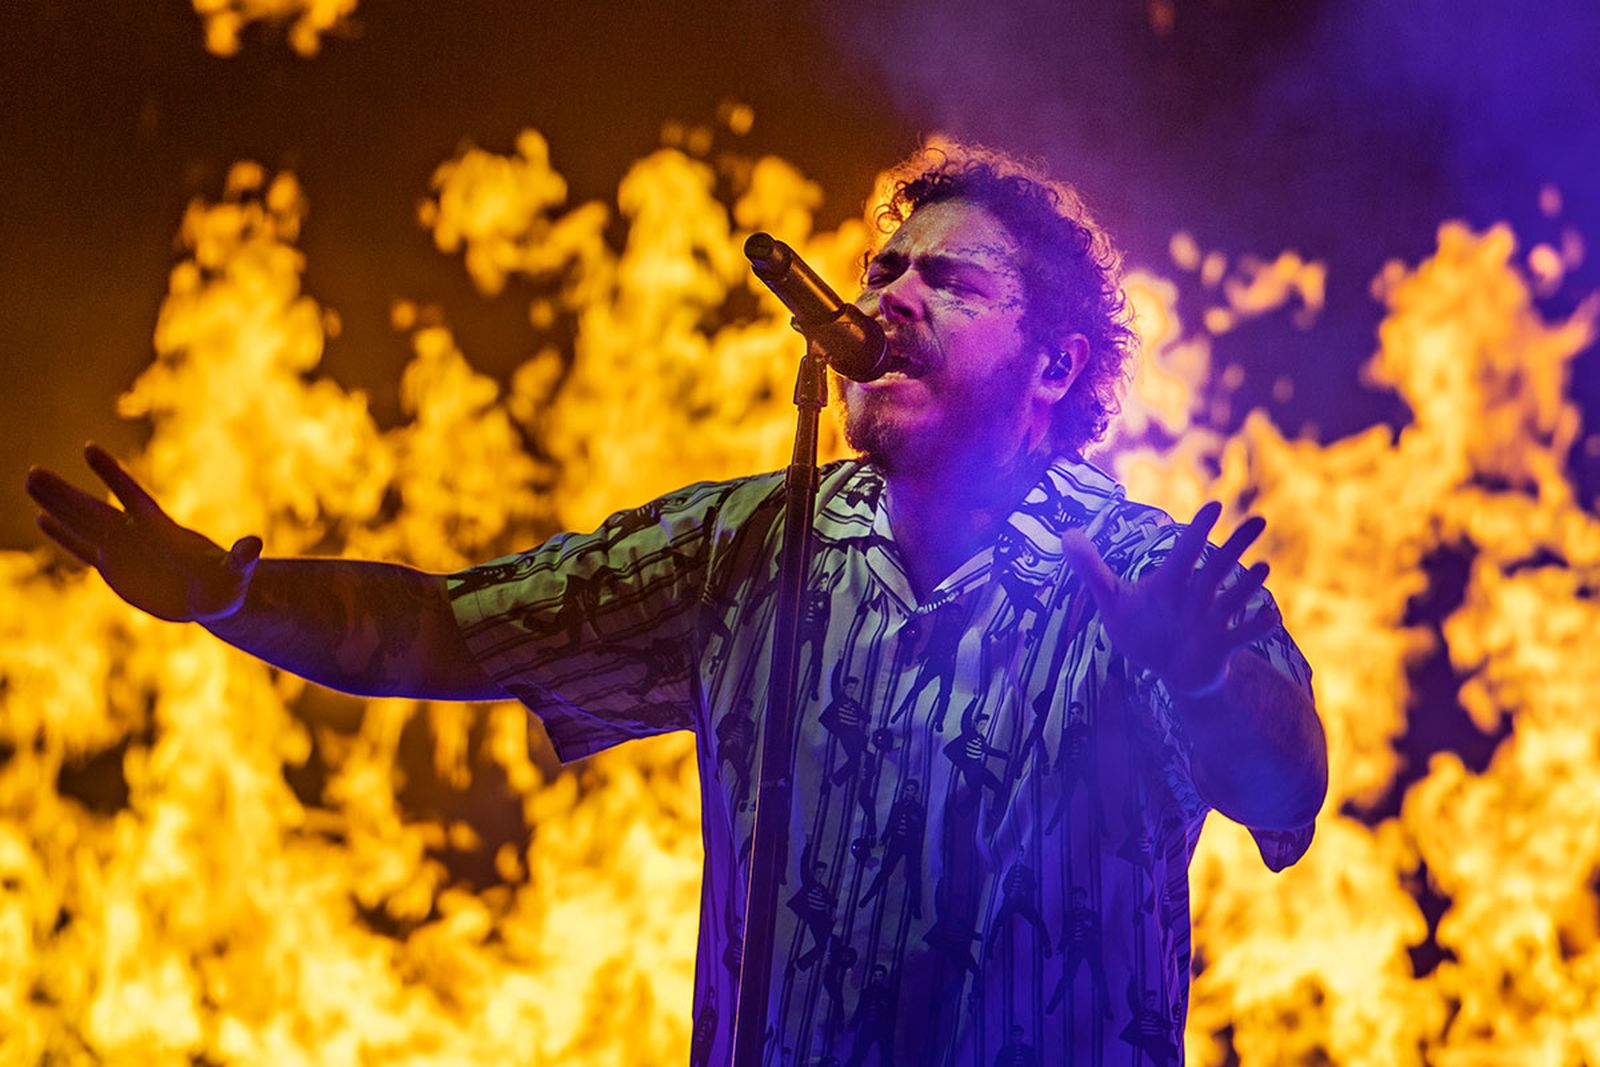 Post Malone performs on stage during Leeds Festival 2019